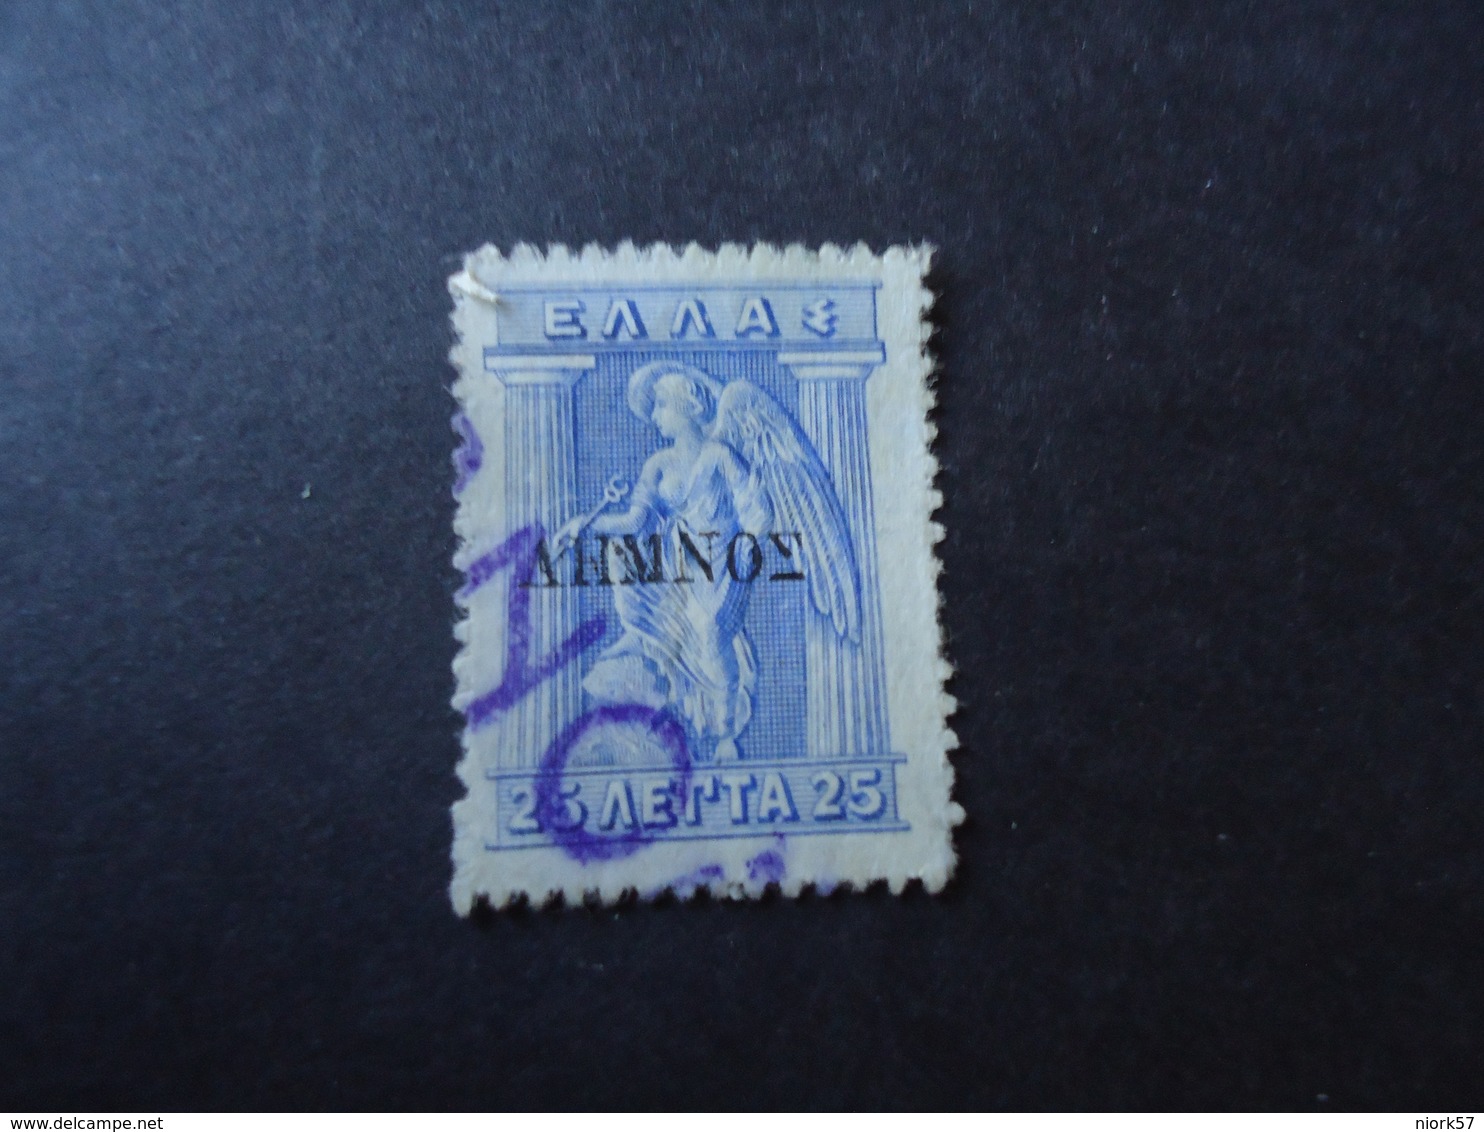 CRETE LEMNOS  GREECE USED STAMPS   WITH POSTMARK  RETHYMNON - Sin Clasificación